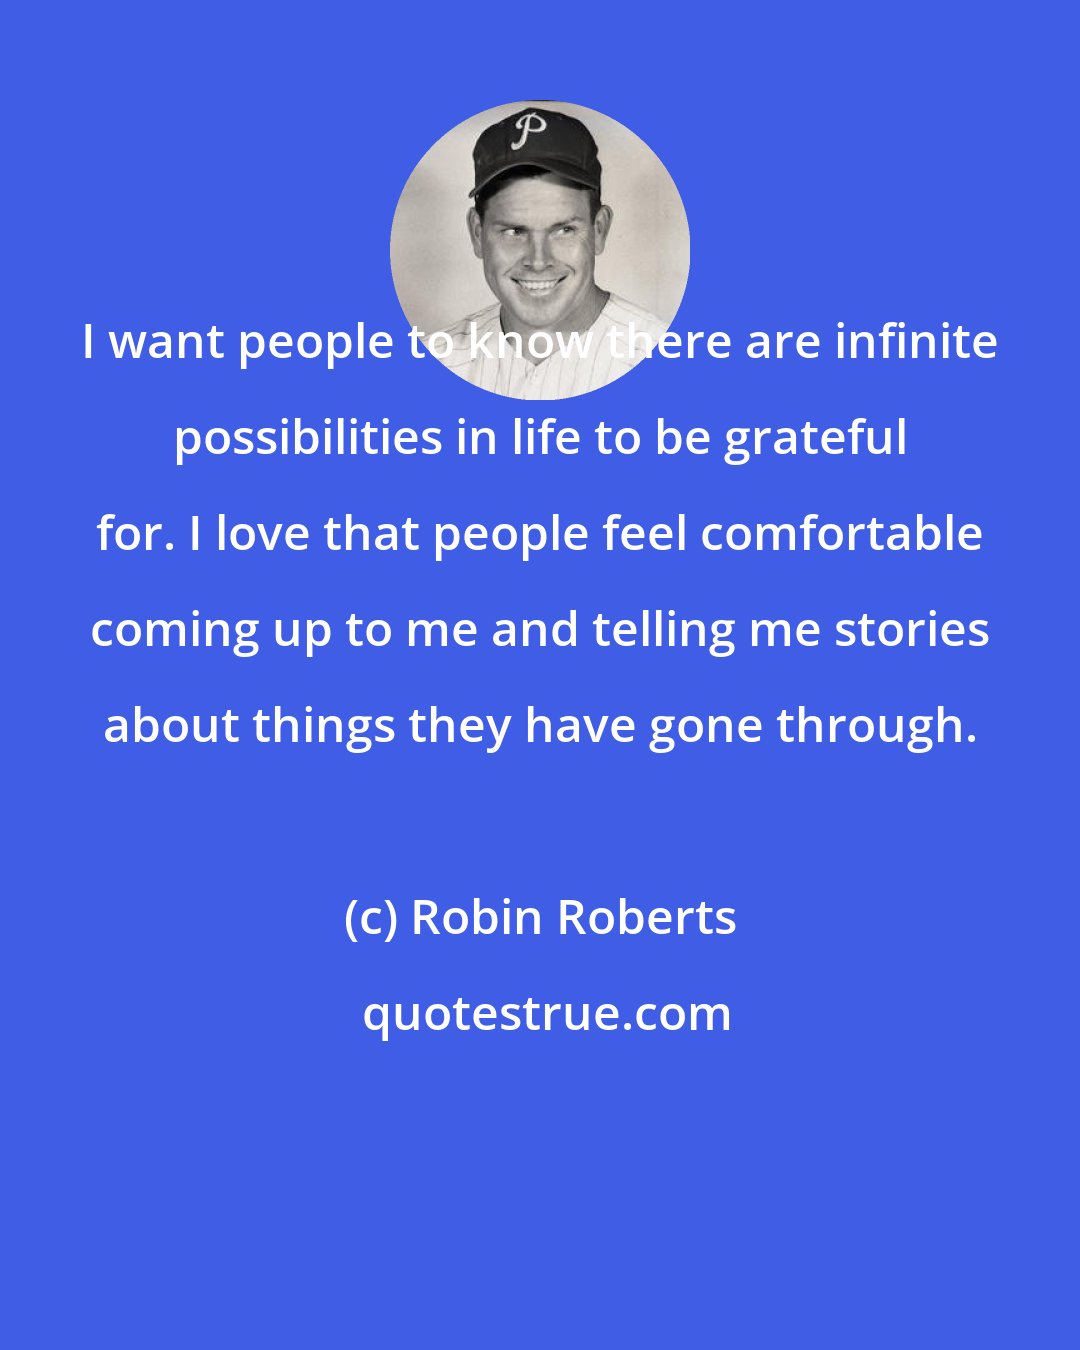 Robin Roberts: I want people to know there are infinite possibilities in life to be grateful for. I love that people feel comfortable coming up to me and telling me stories about things they have gone through.